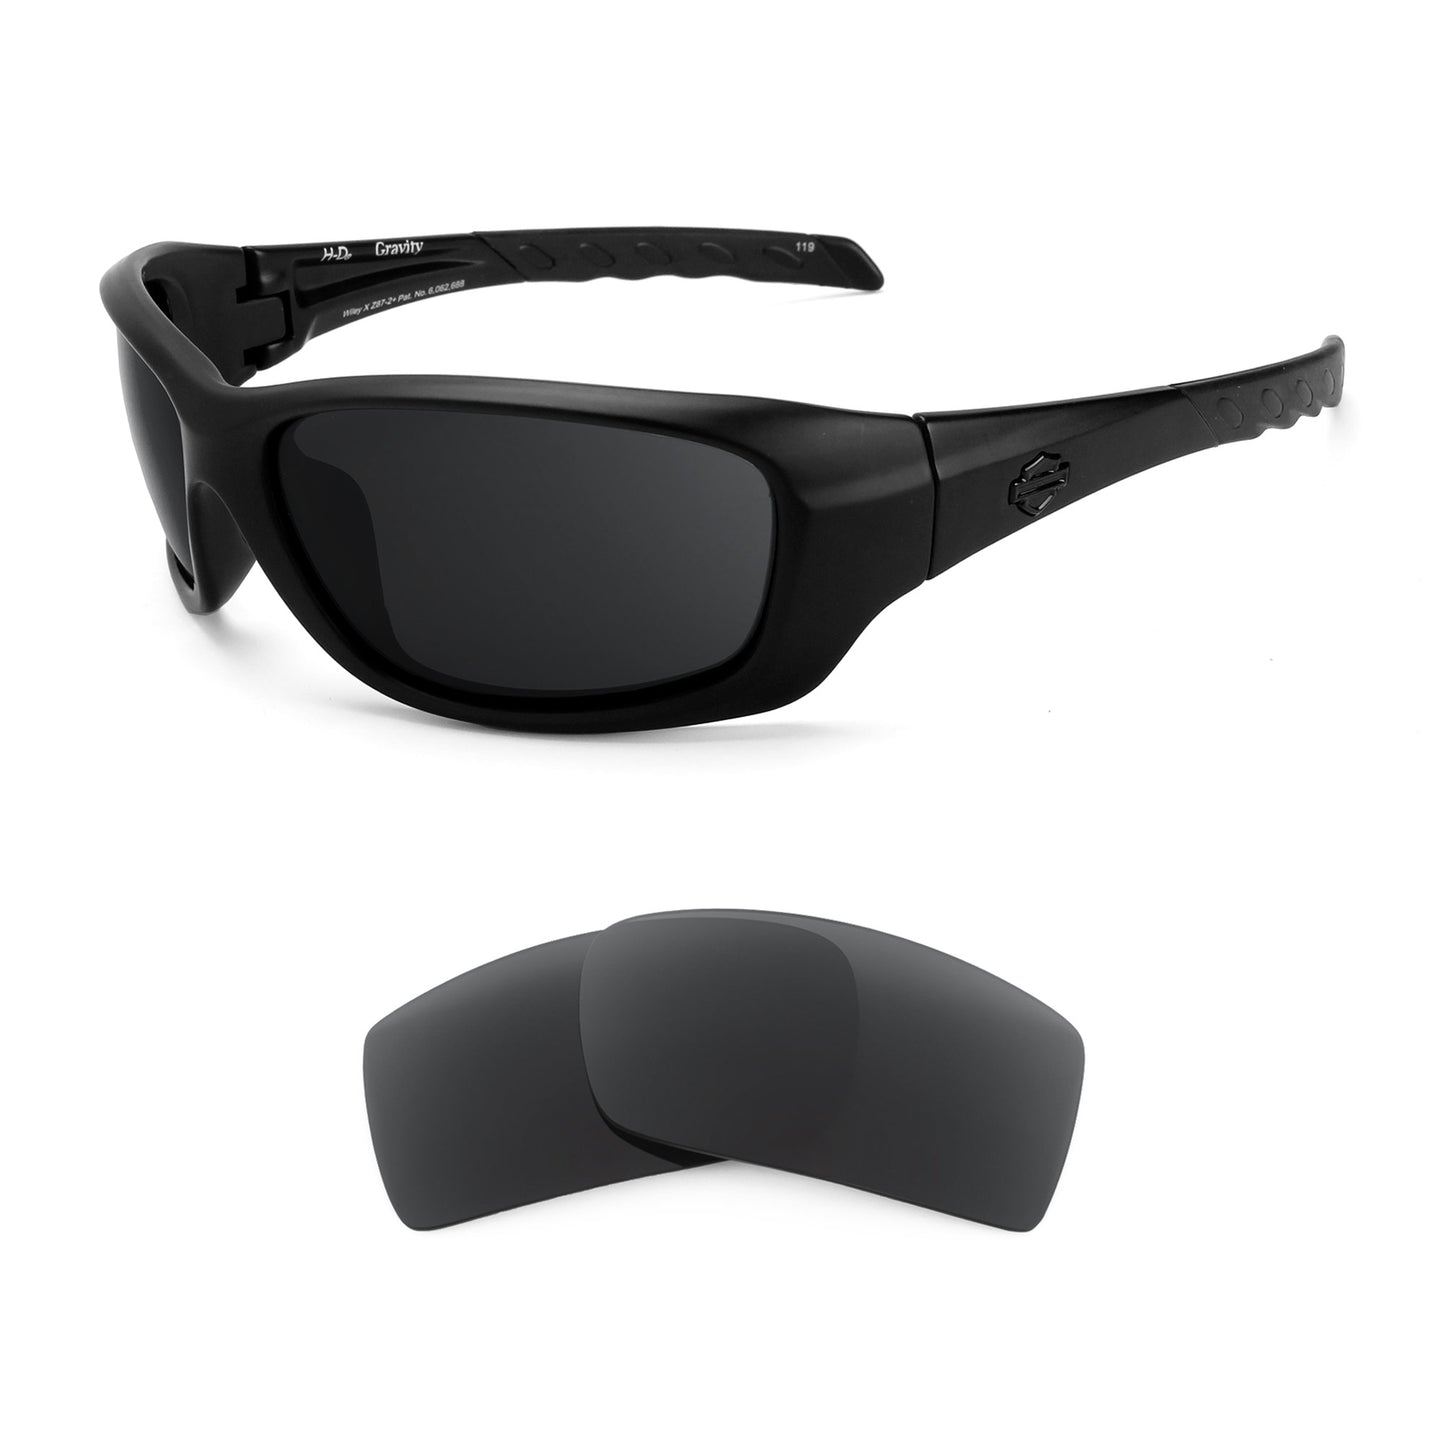 Harley Davidson Gravity sunglasses with replacement lenses